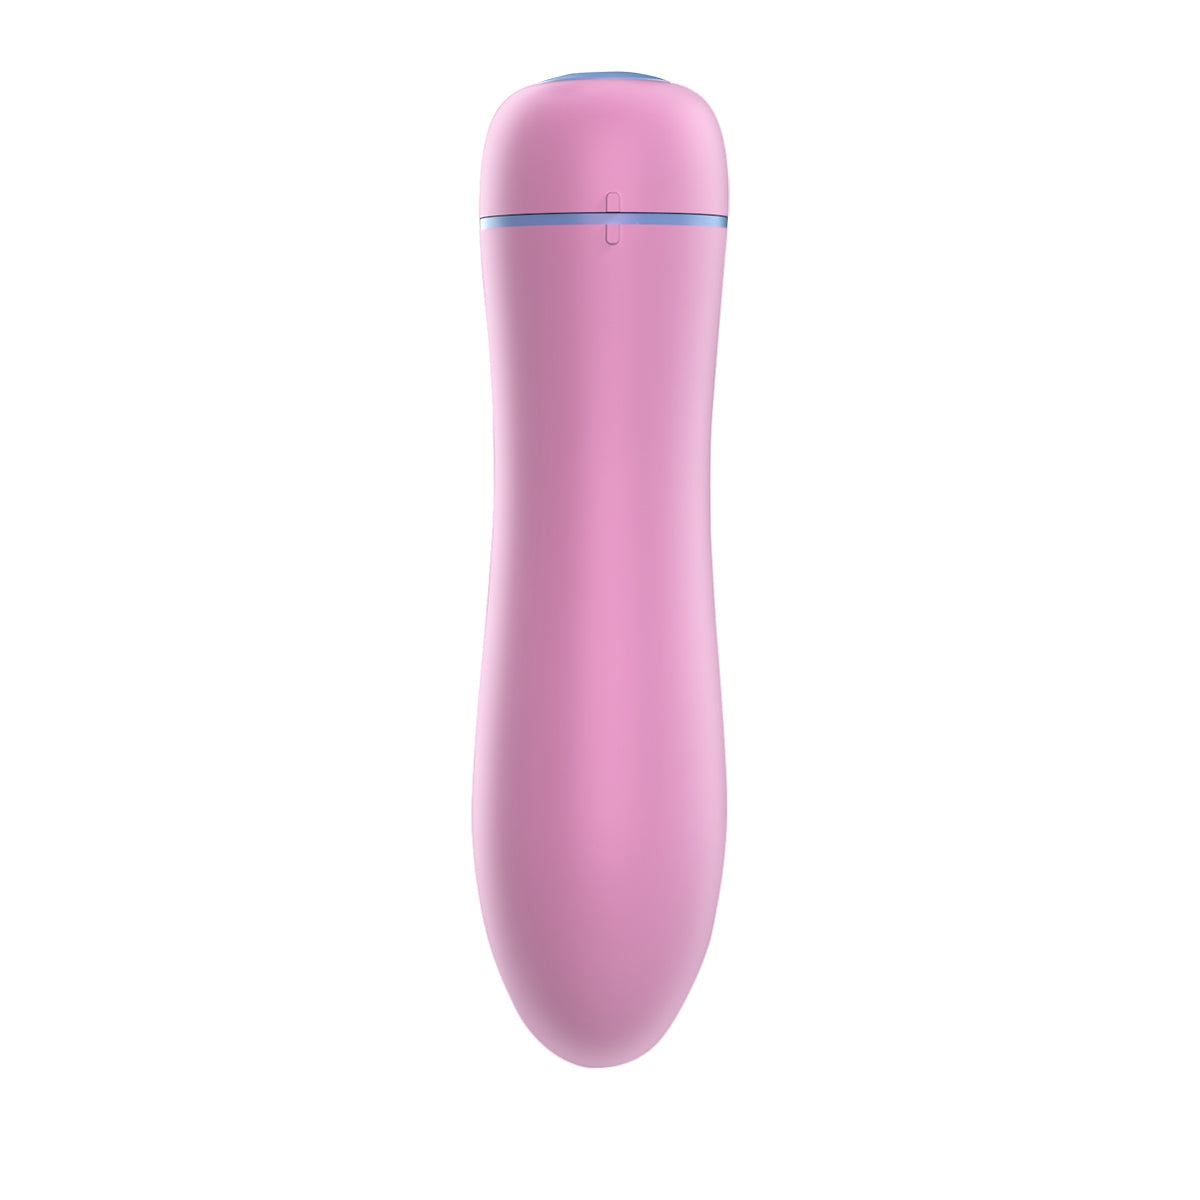 Ffix Bullet: The Ultimate Quick and Easy Pleasure Experience Light Pink